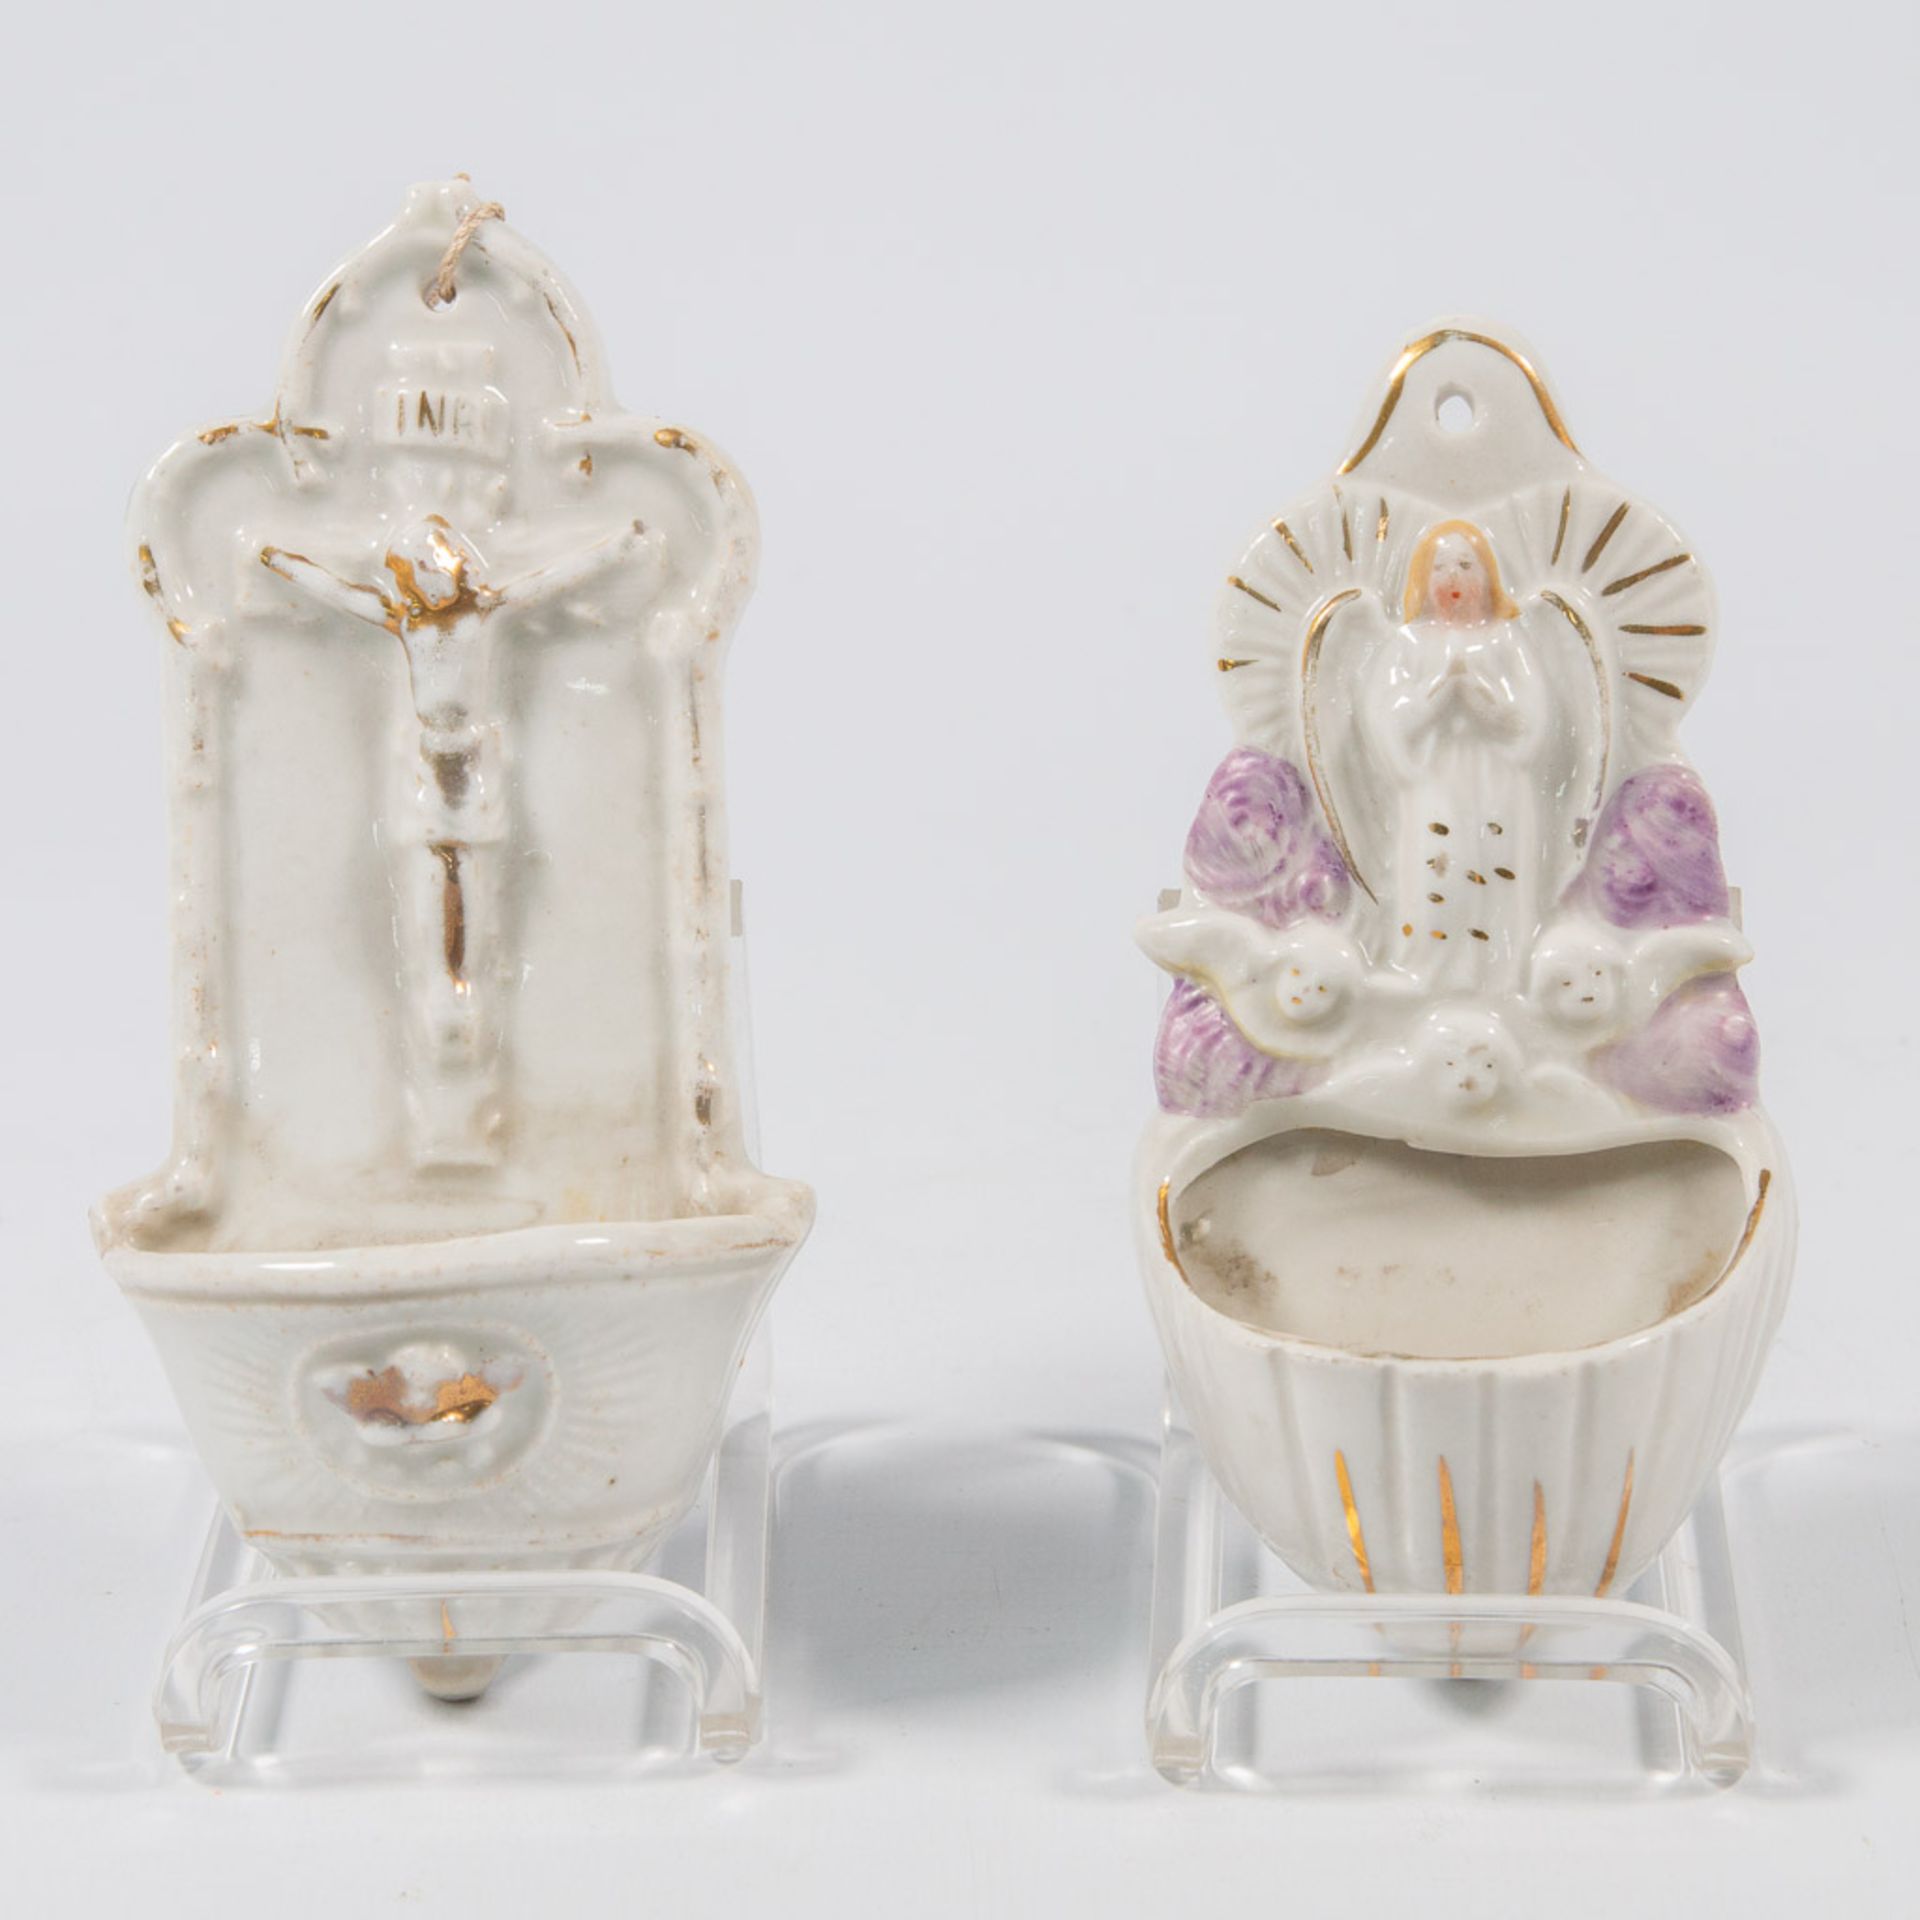 A collection of 11 bisque porcelain holy statues, Mary, Joseph, and Madonna. - Image 17 of 49